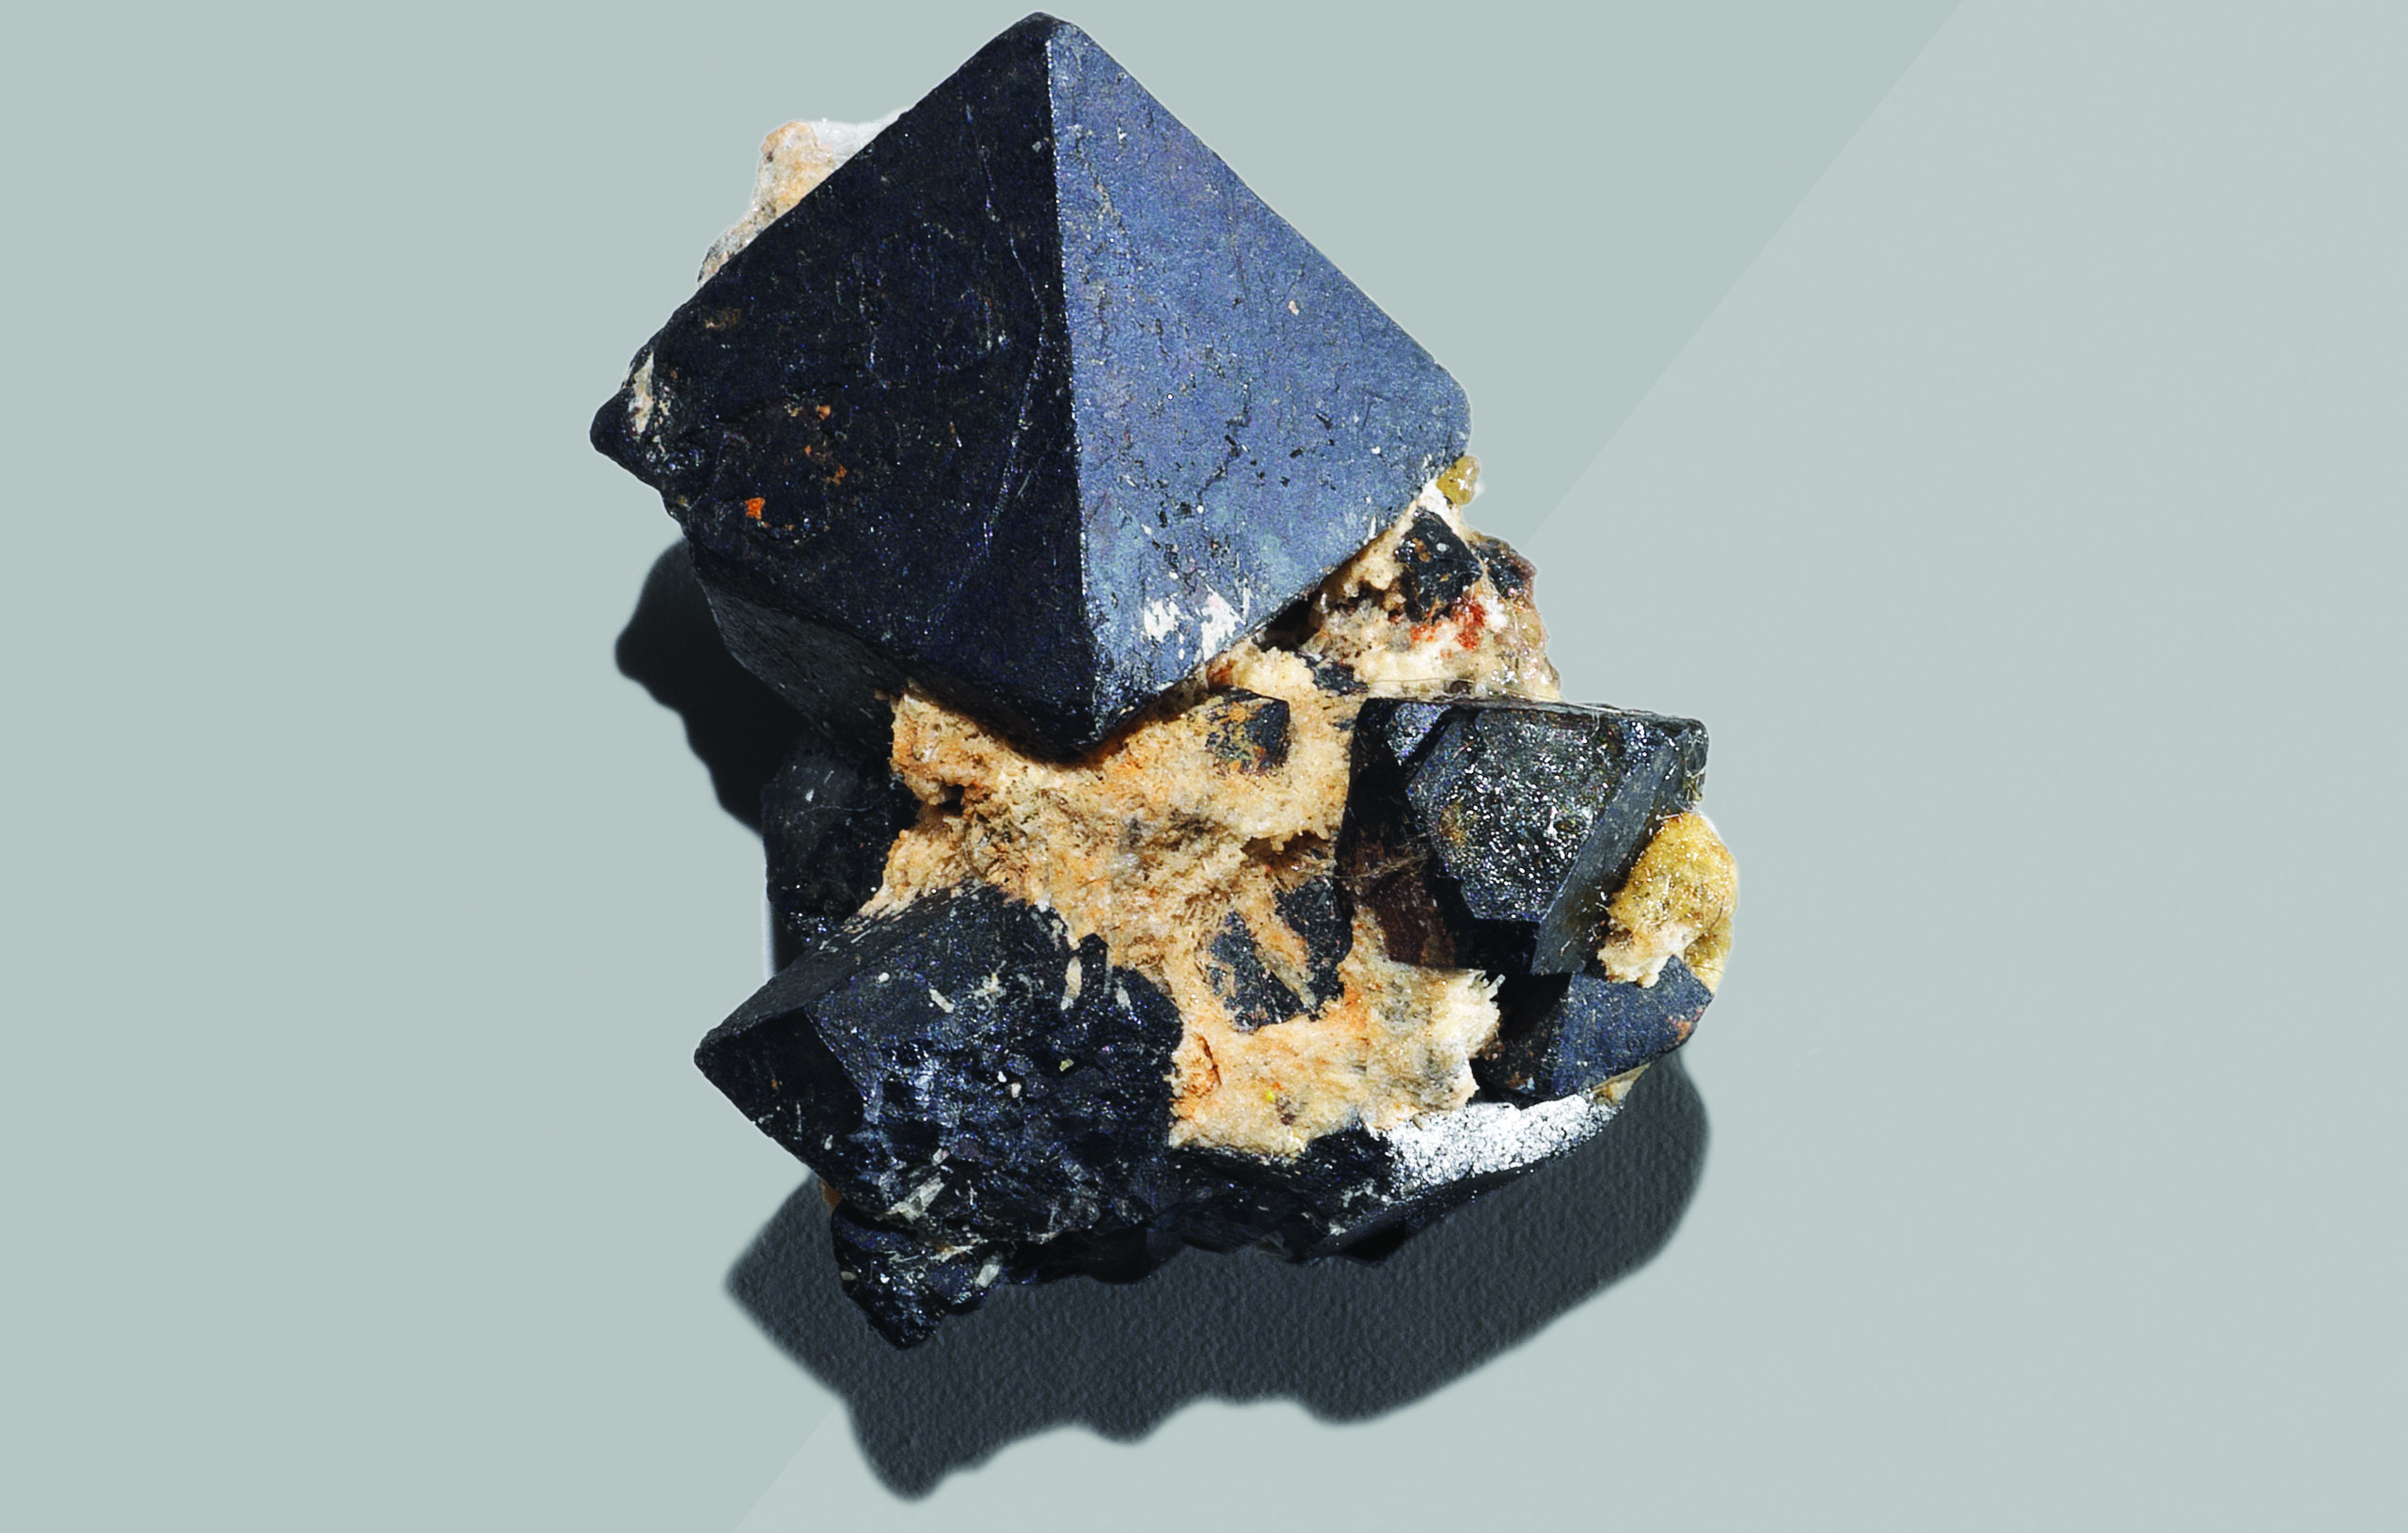 Can This Mineral Power The Planet?